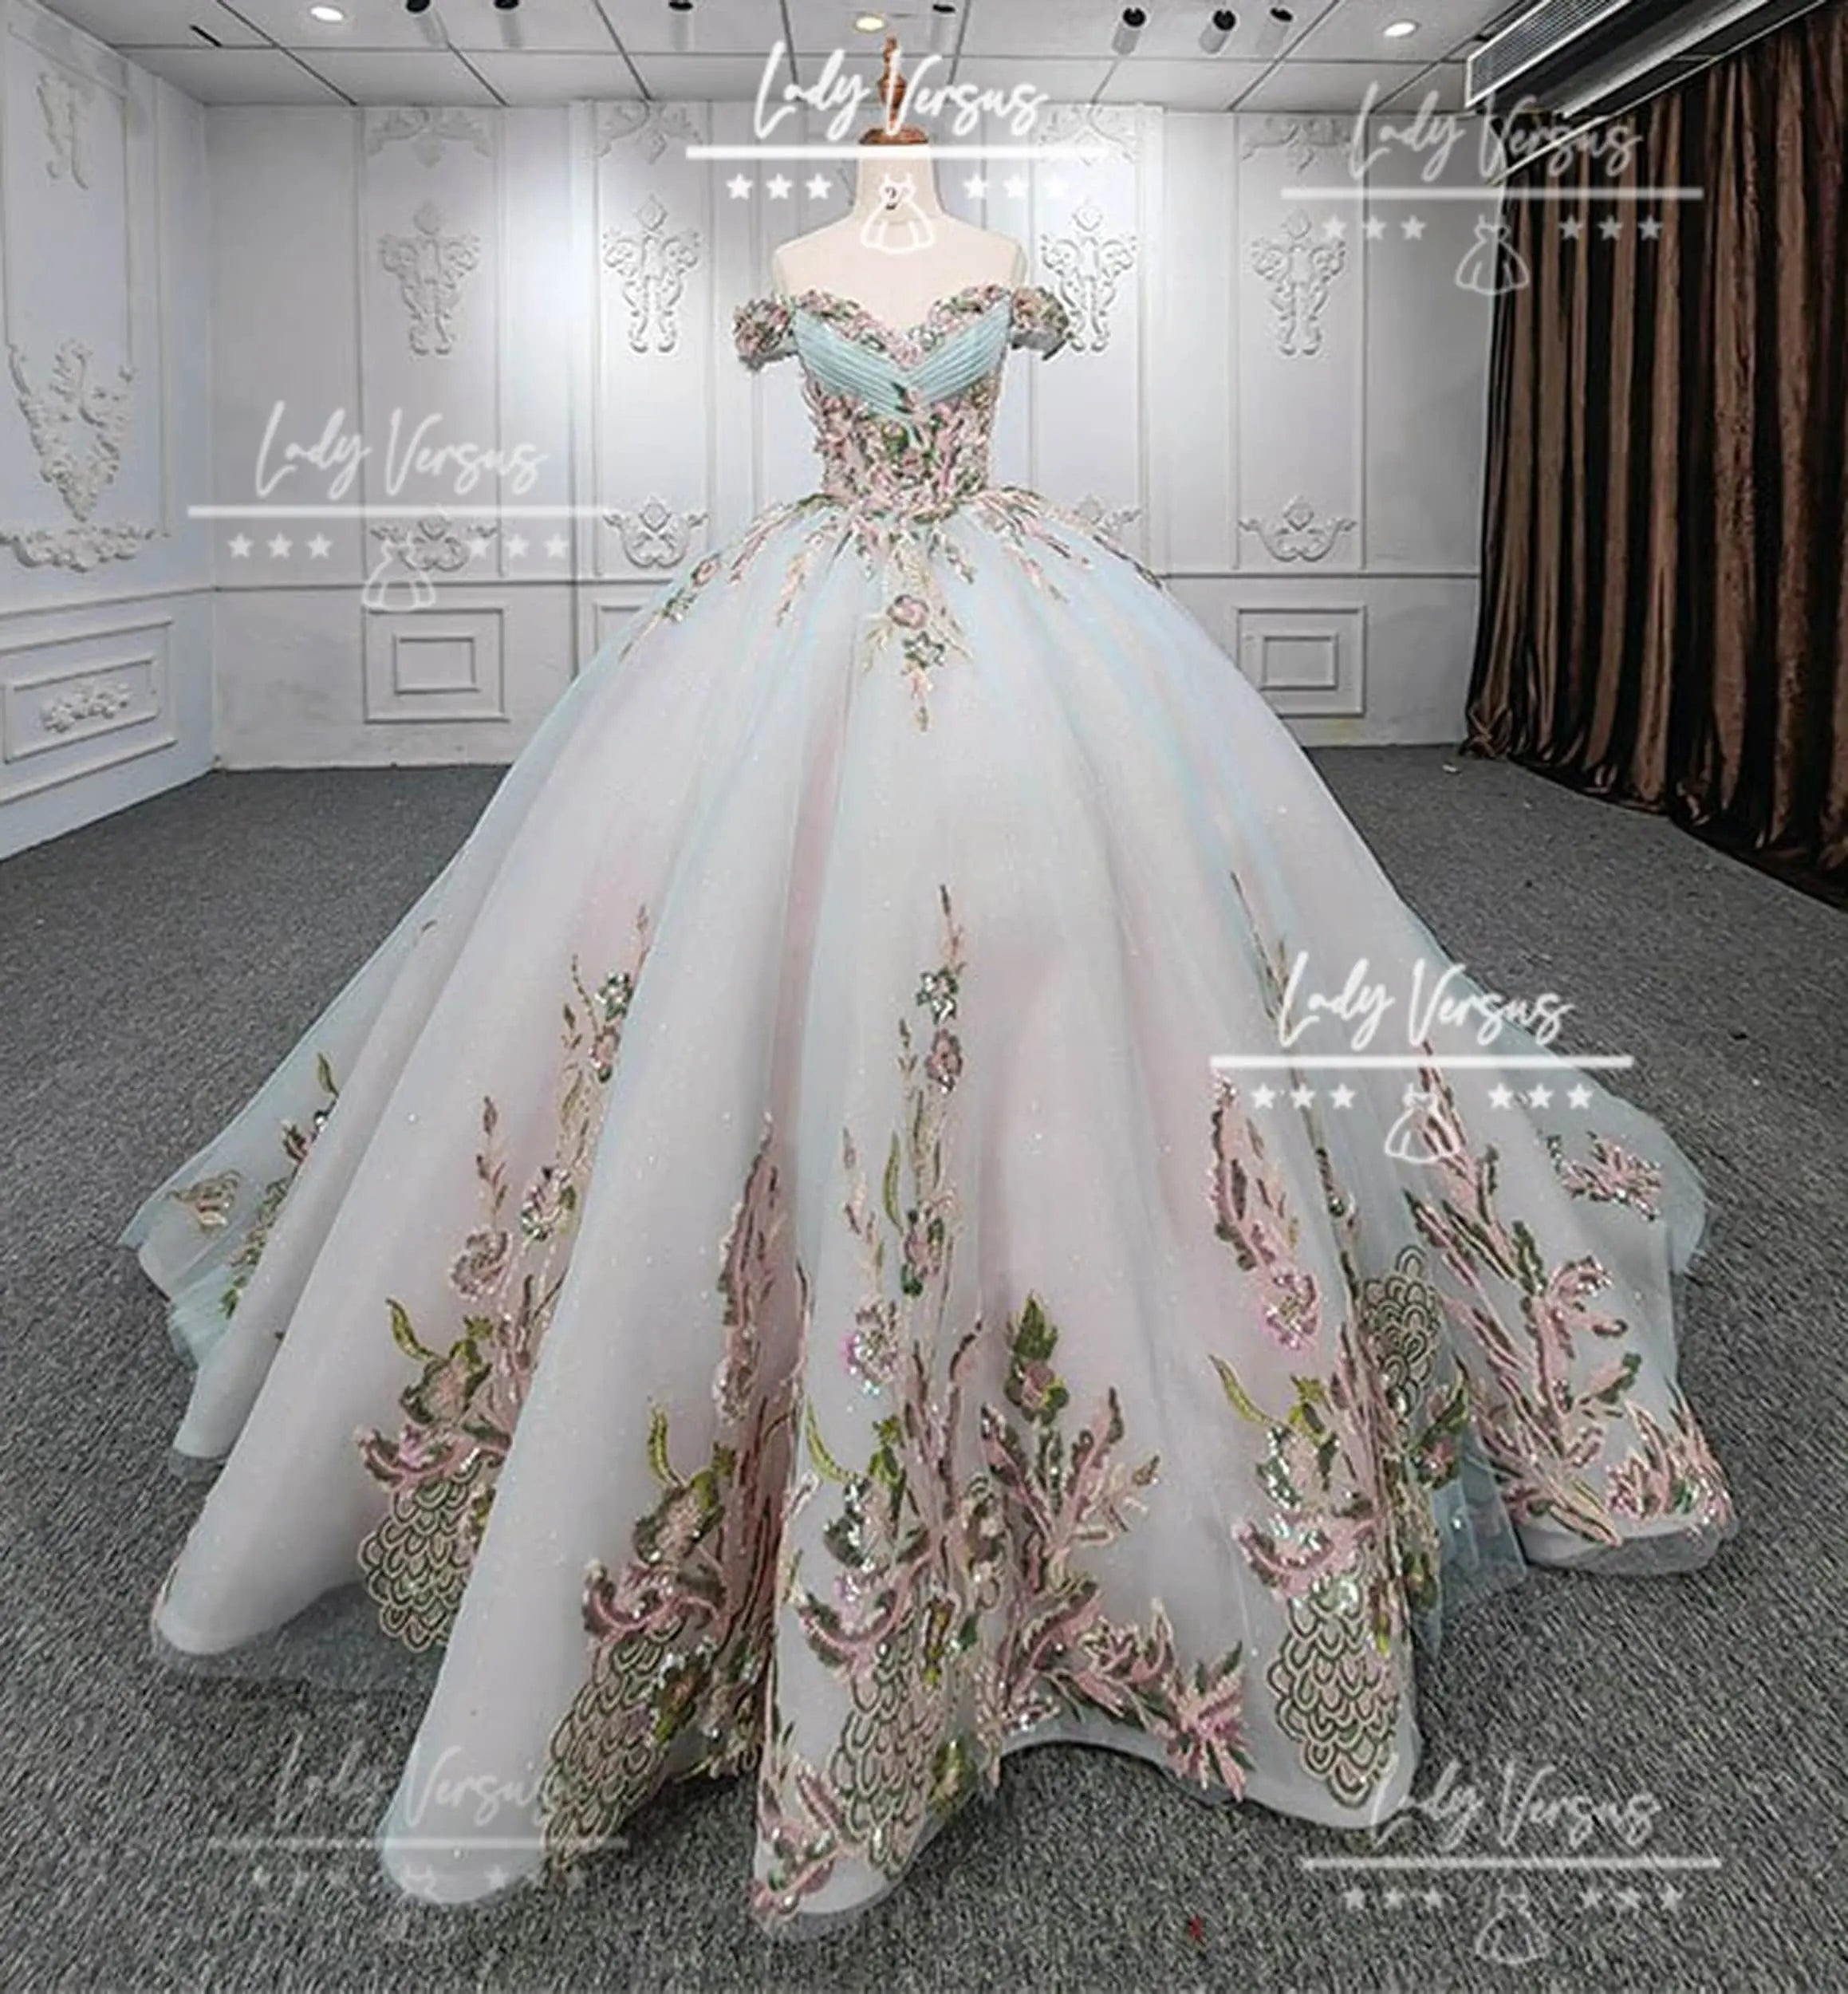 Beautiful fairytale wedding dress/  Sequince embellished  dress/ Extravagant bridal gown/Gorgeous wedding dress/ Ball Gown/Prom dress Lady Versus